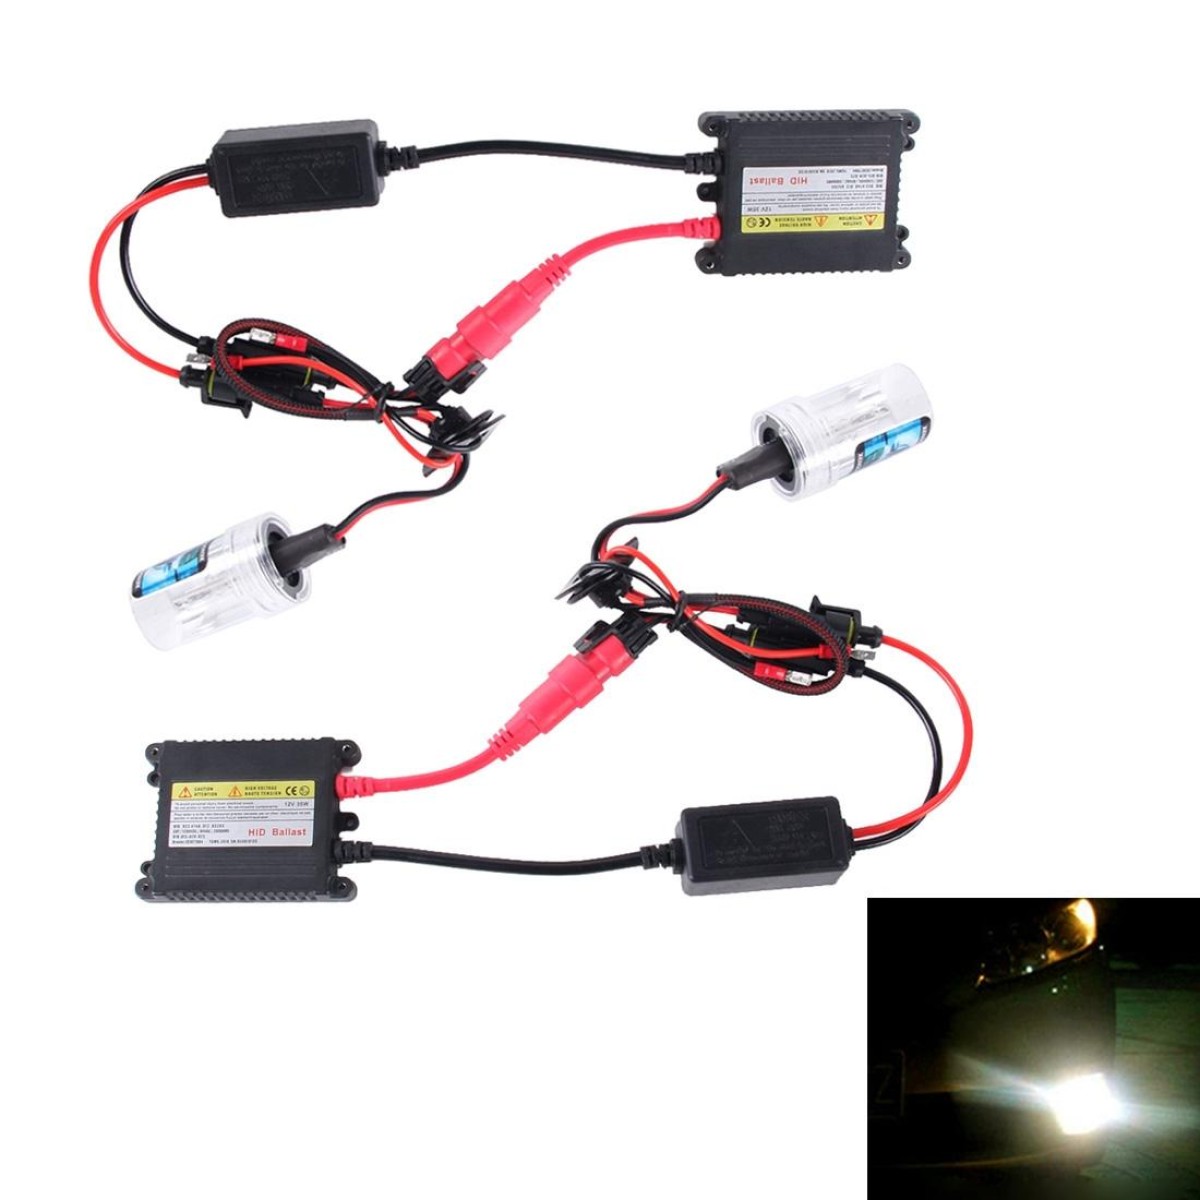 DC12V 35W 2x H7 Slim HID Xenon Light, High Intensity Discharge Lamp, Color Temperature: 8000K